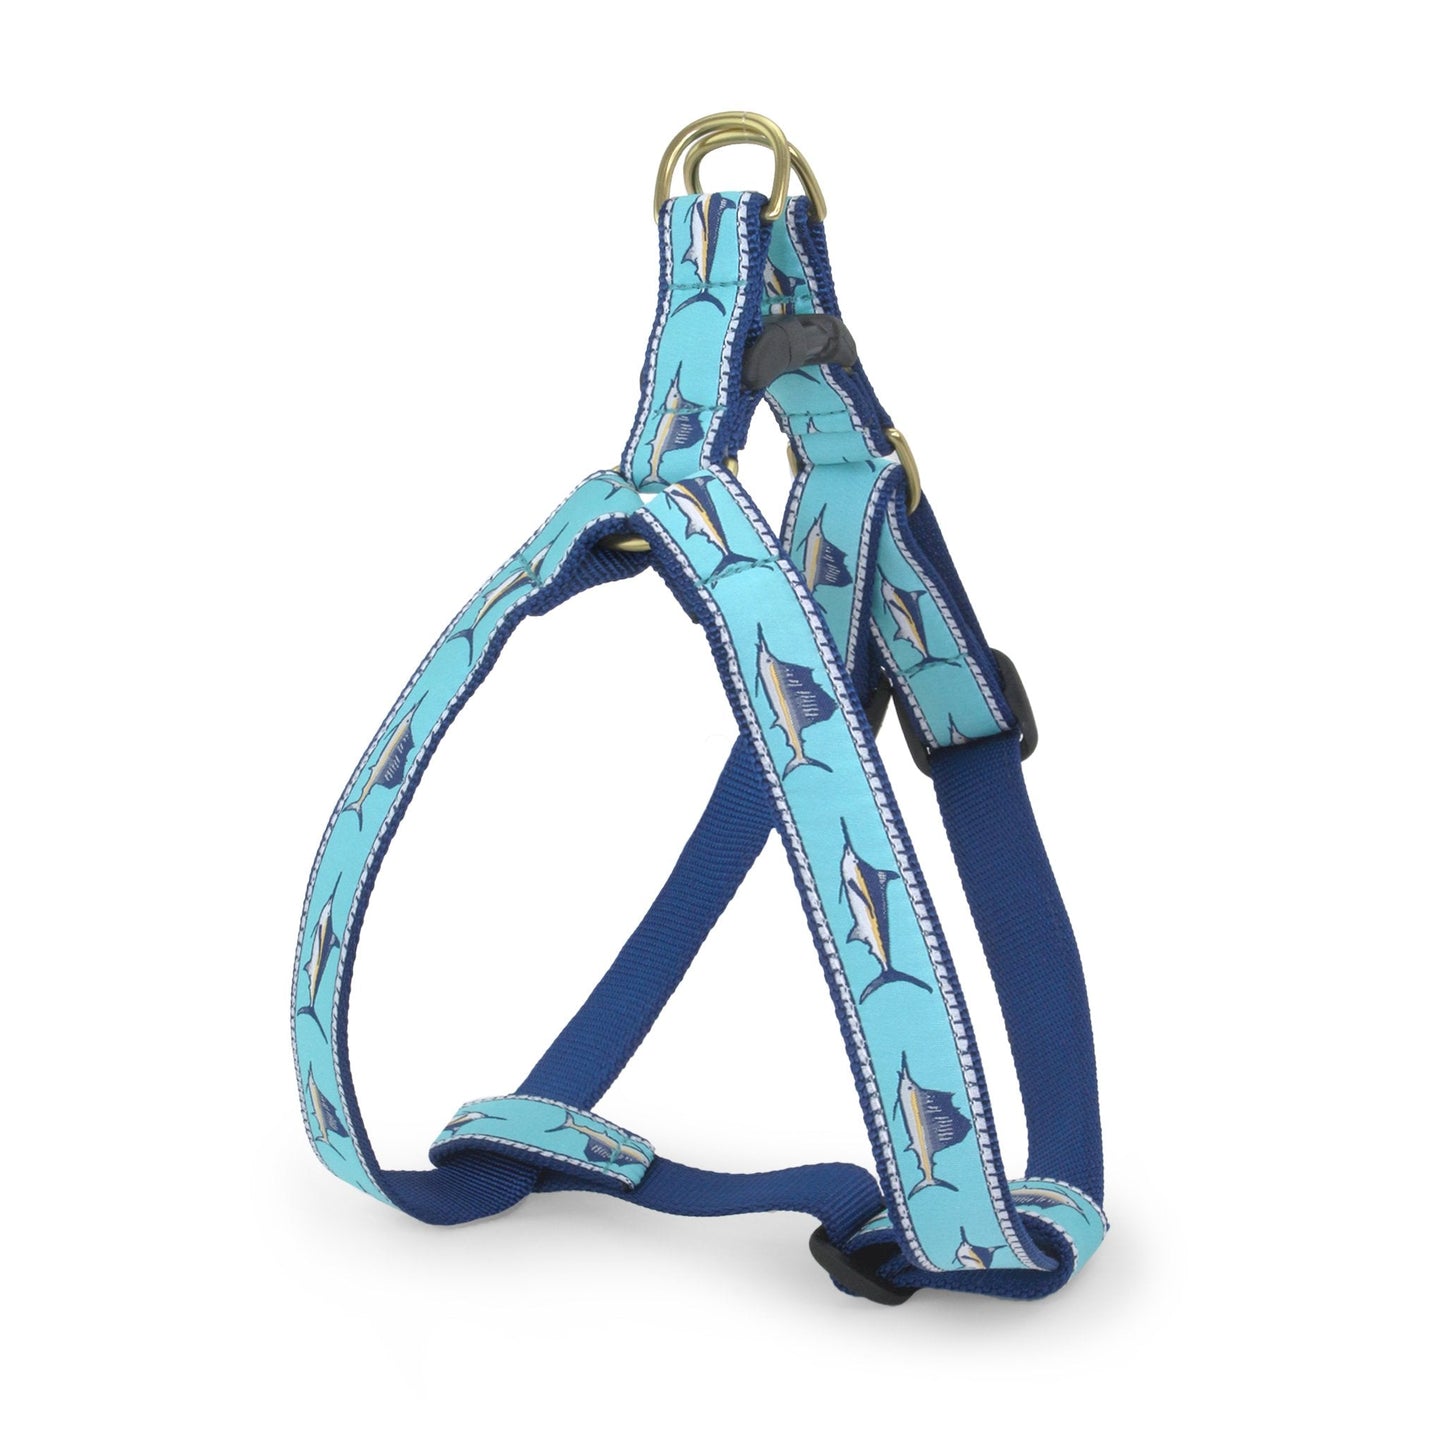 Marlin Dog Harness by Up Country